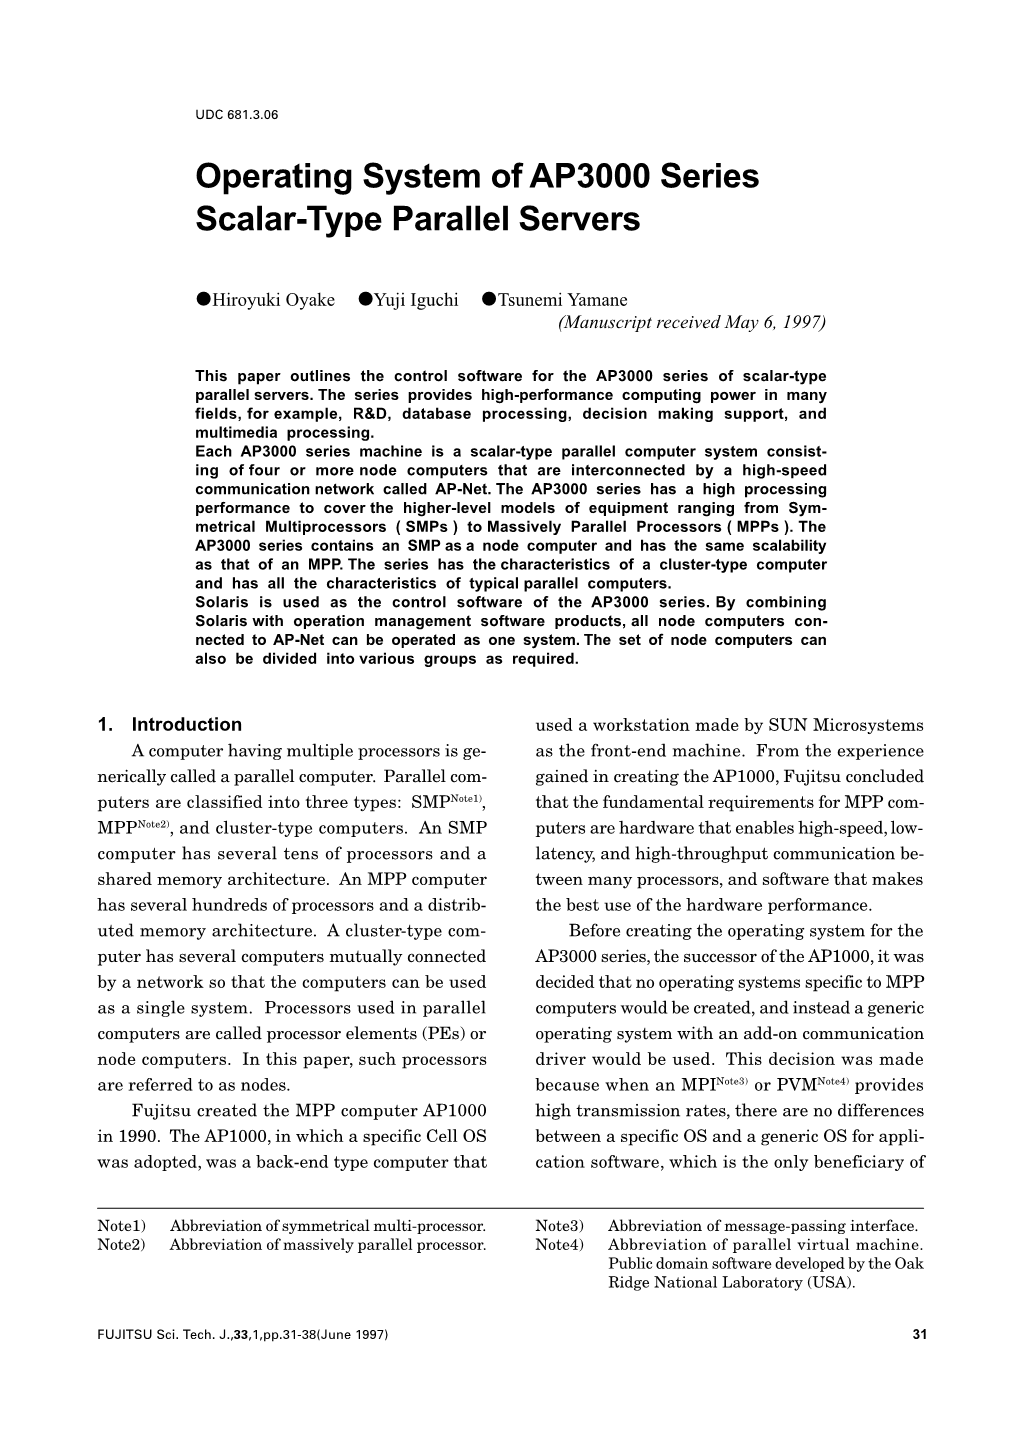 Operating System of AP3000 Series Scalar-Type Parallel Servers